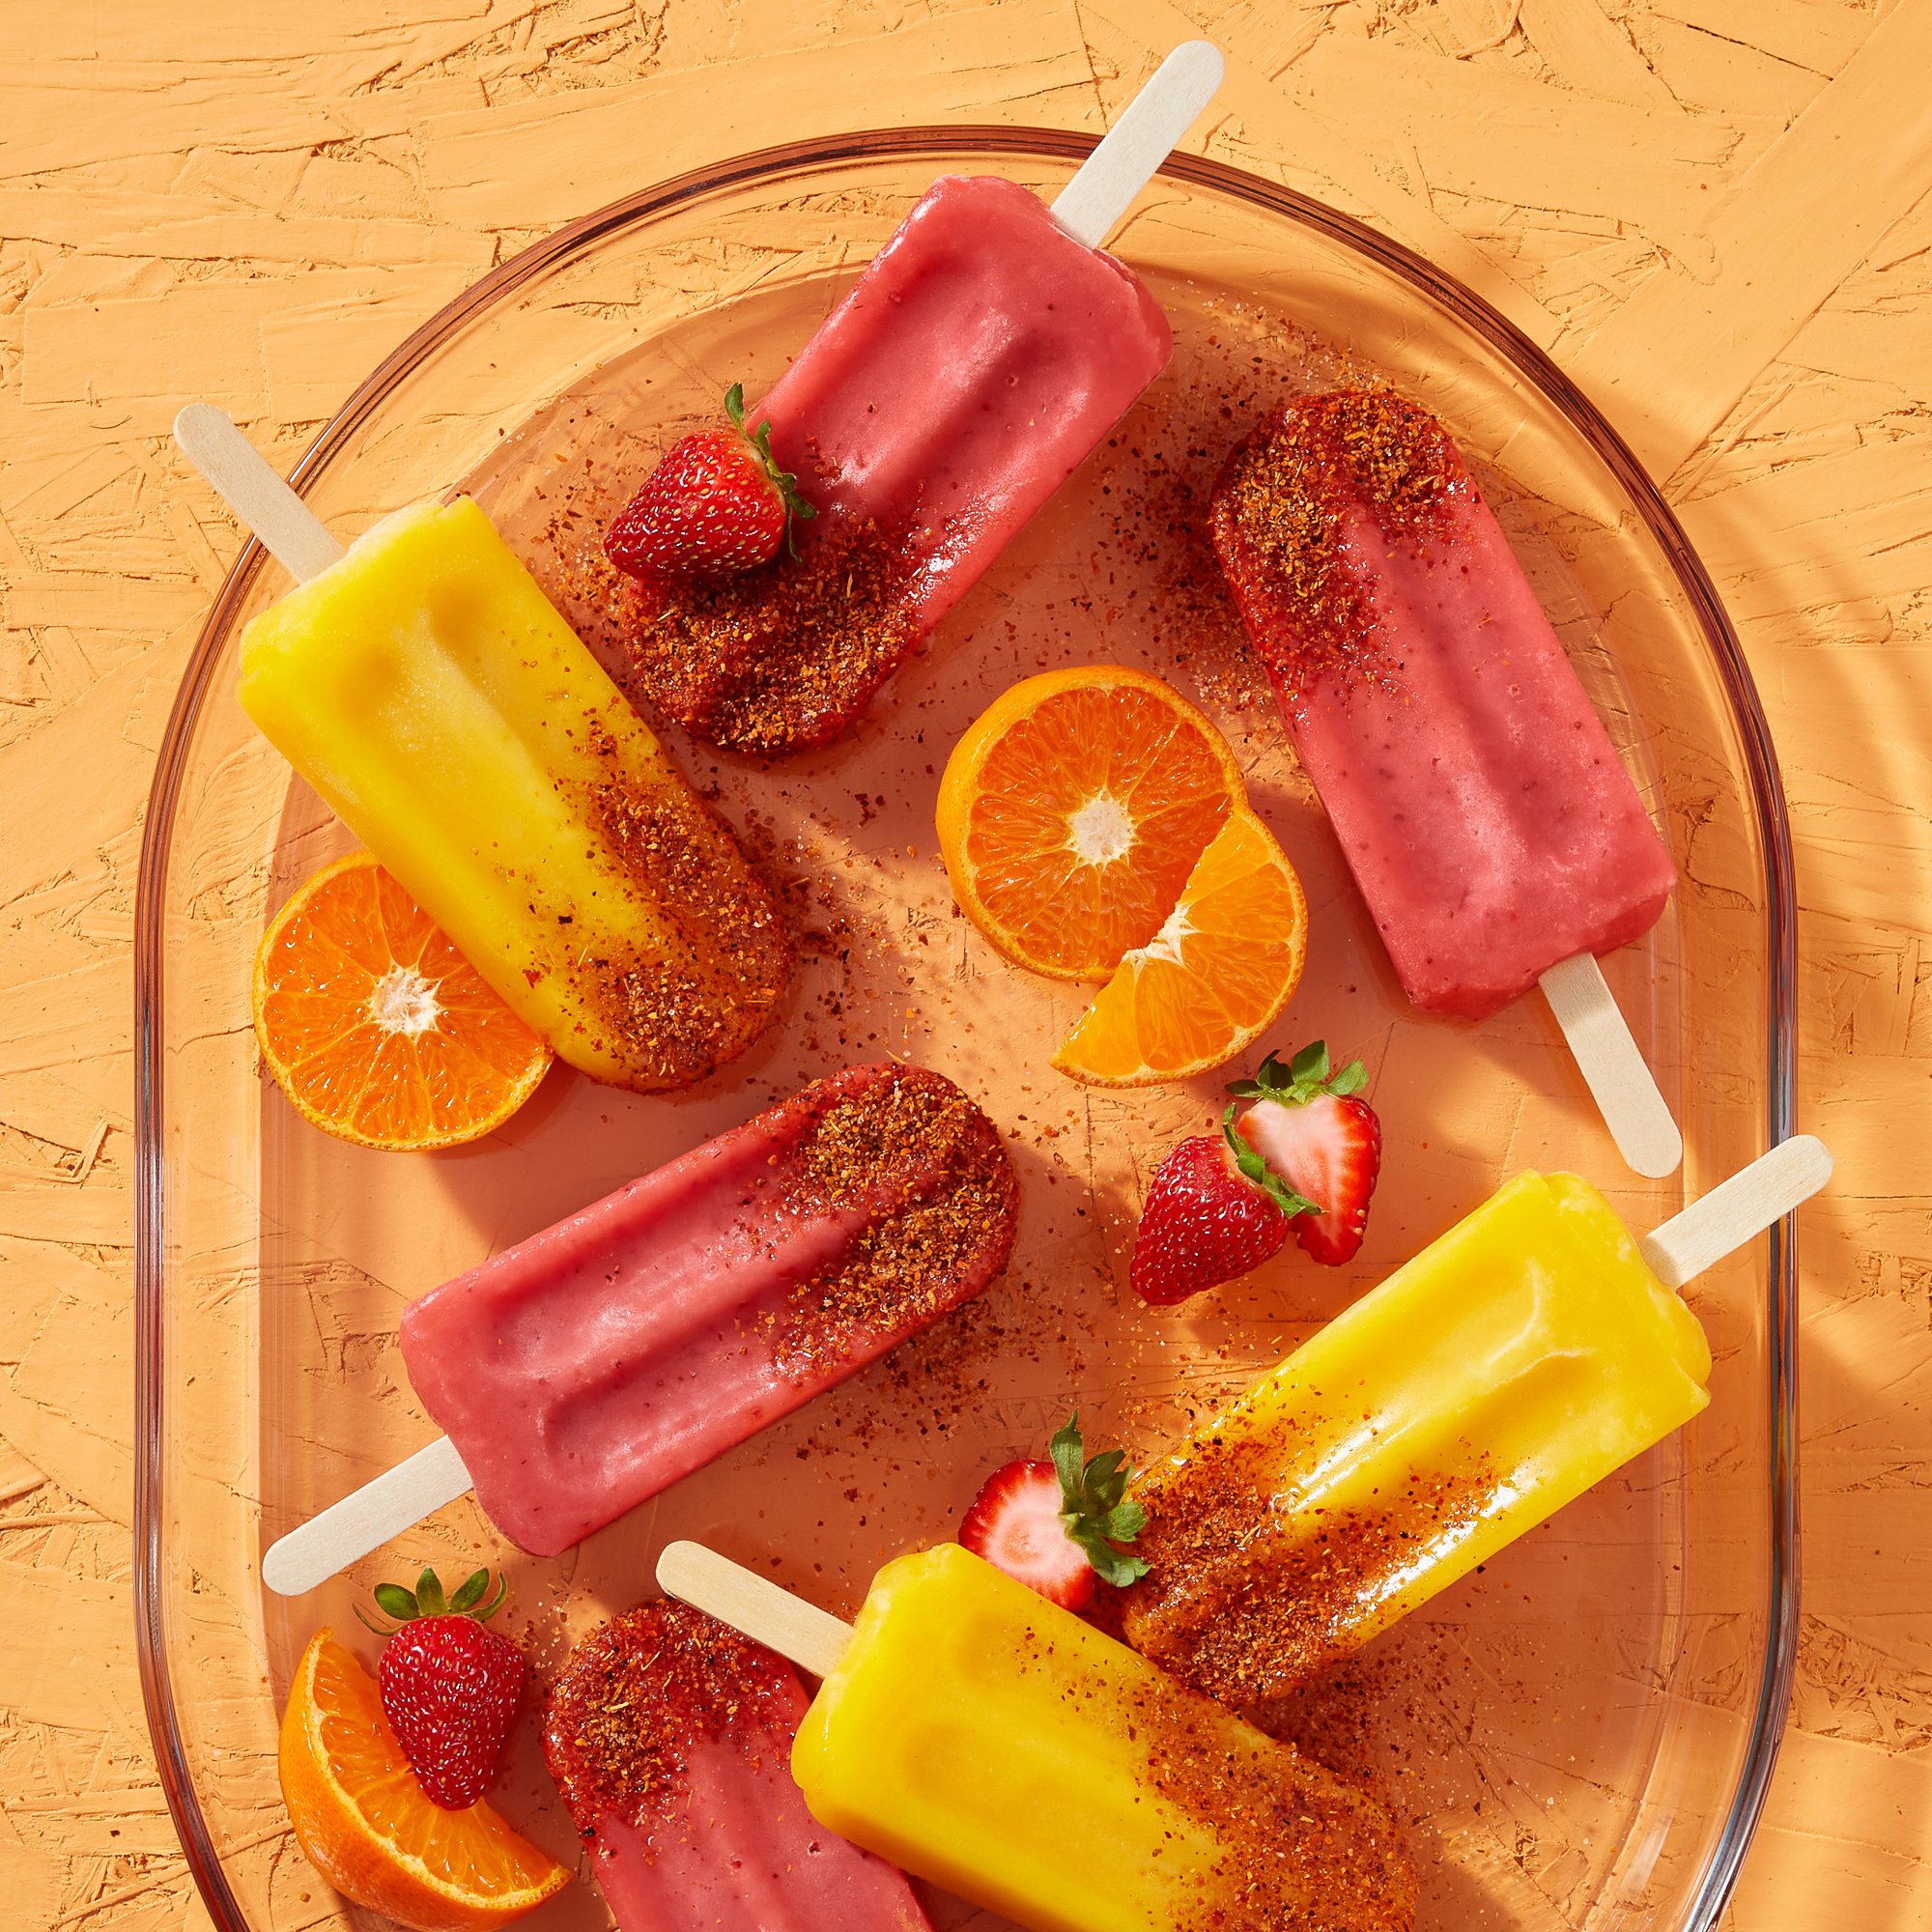 C-001945-01-023_Grocery_May_MealIdeas_spicy_popsicles.jpg